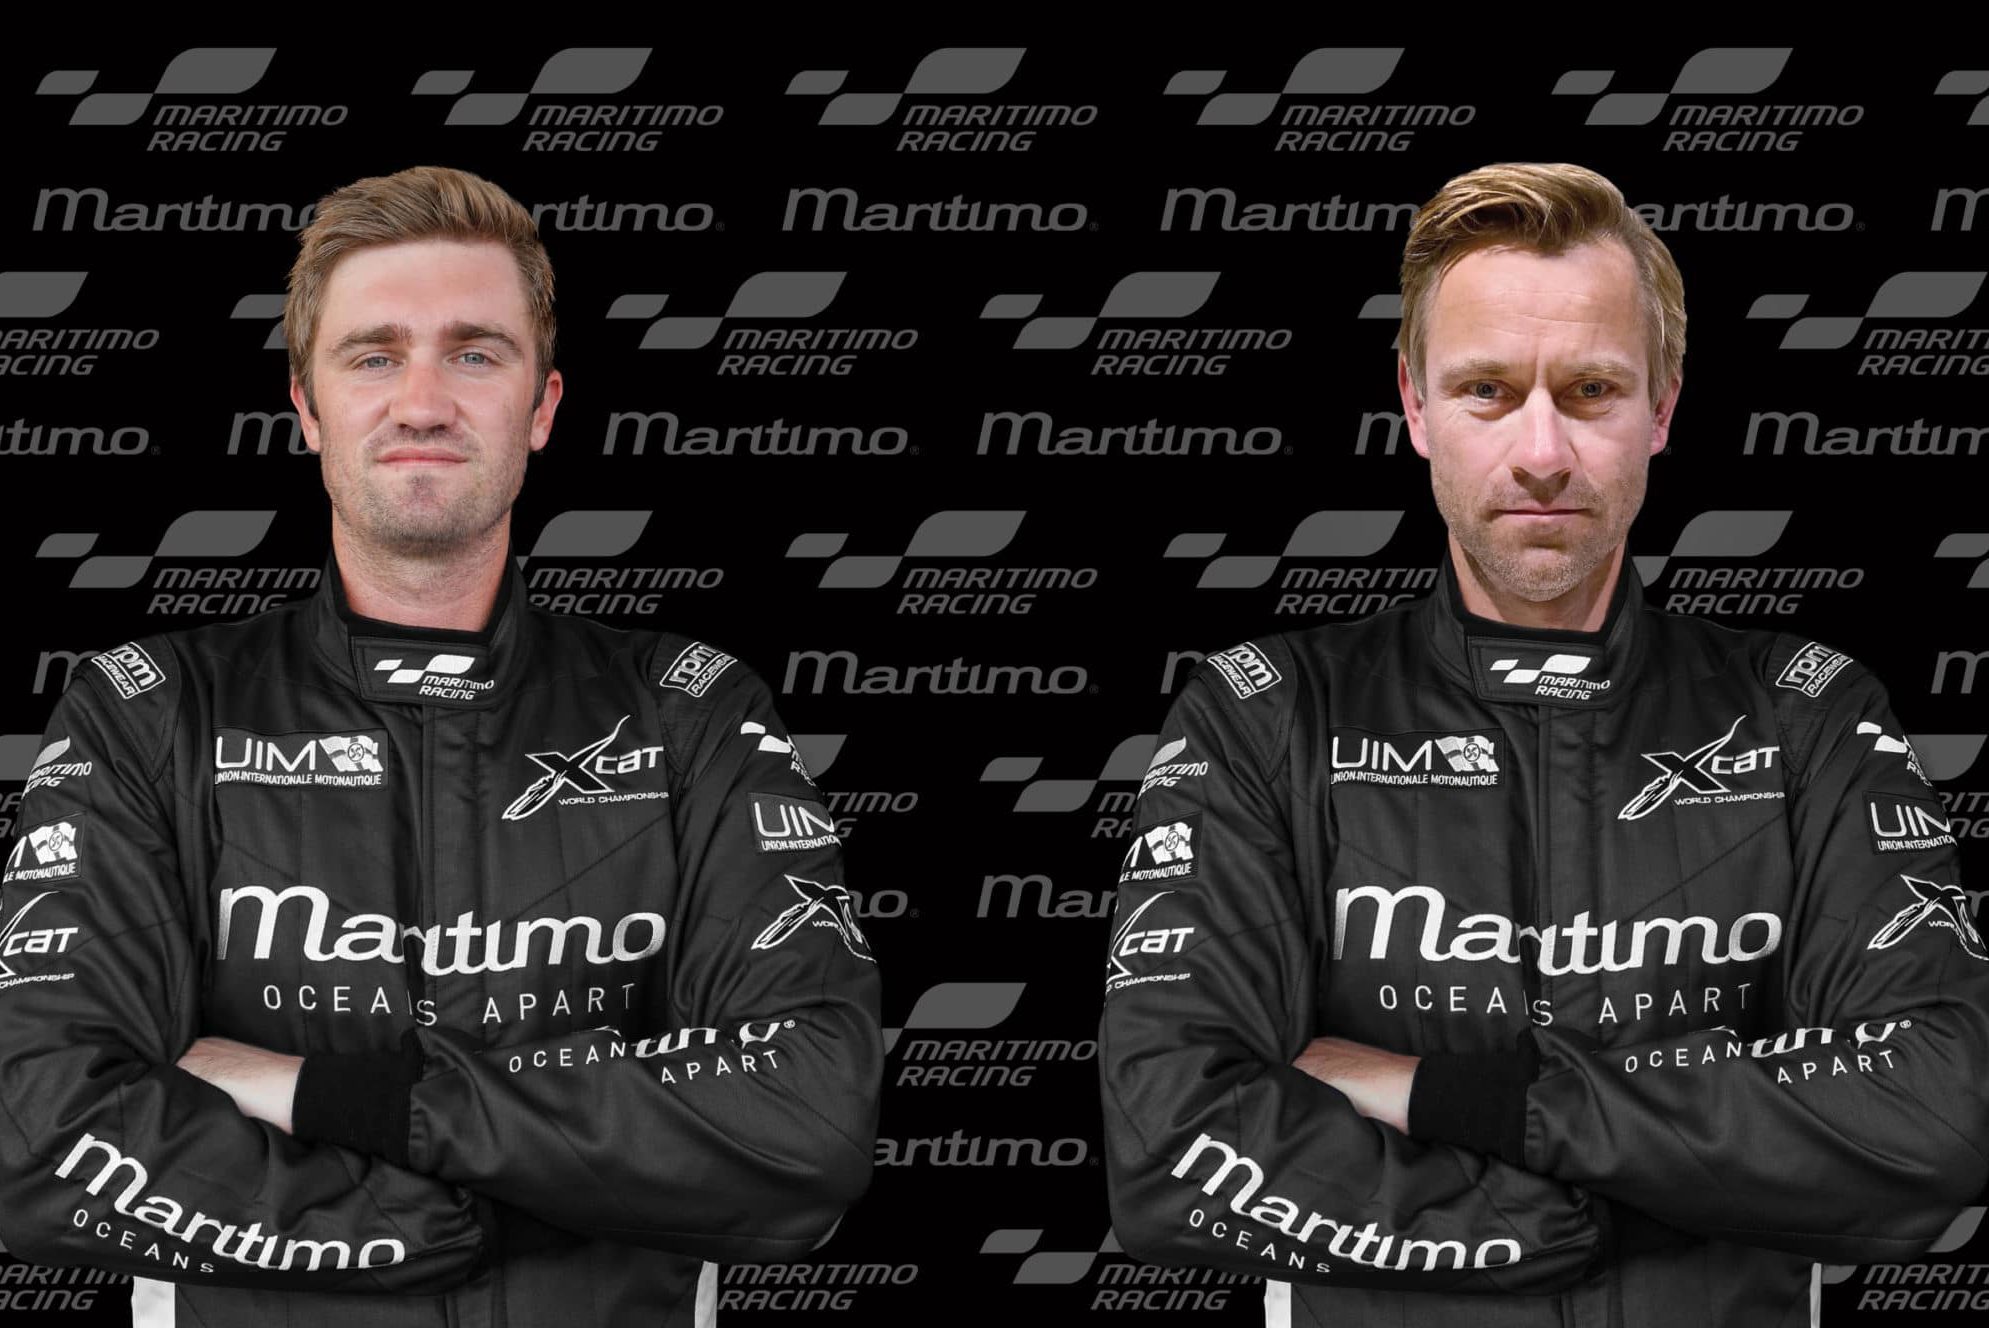 Maritimo Racing drivers feature